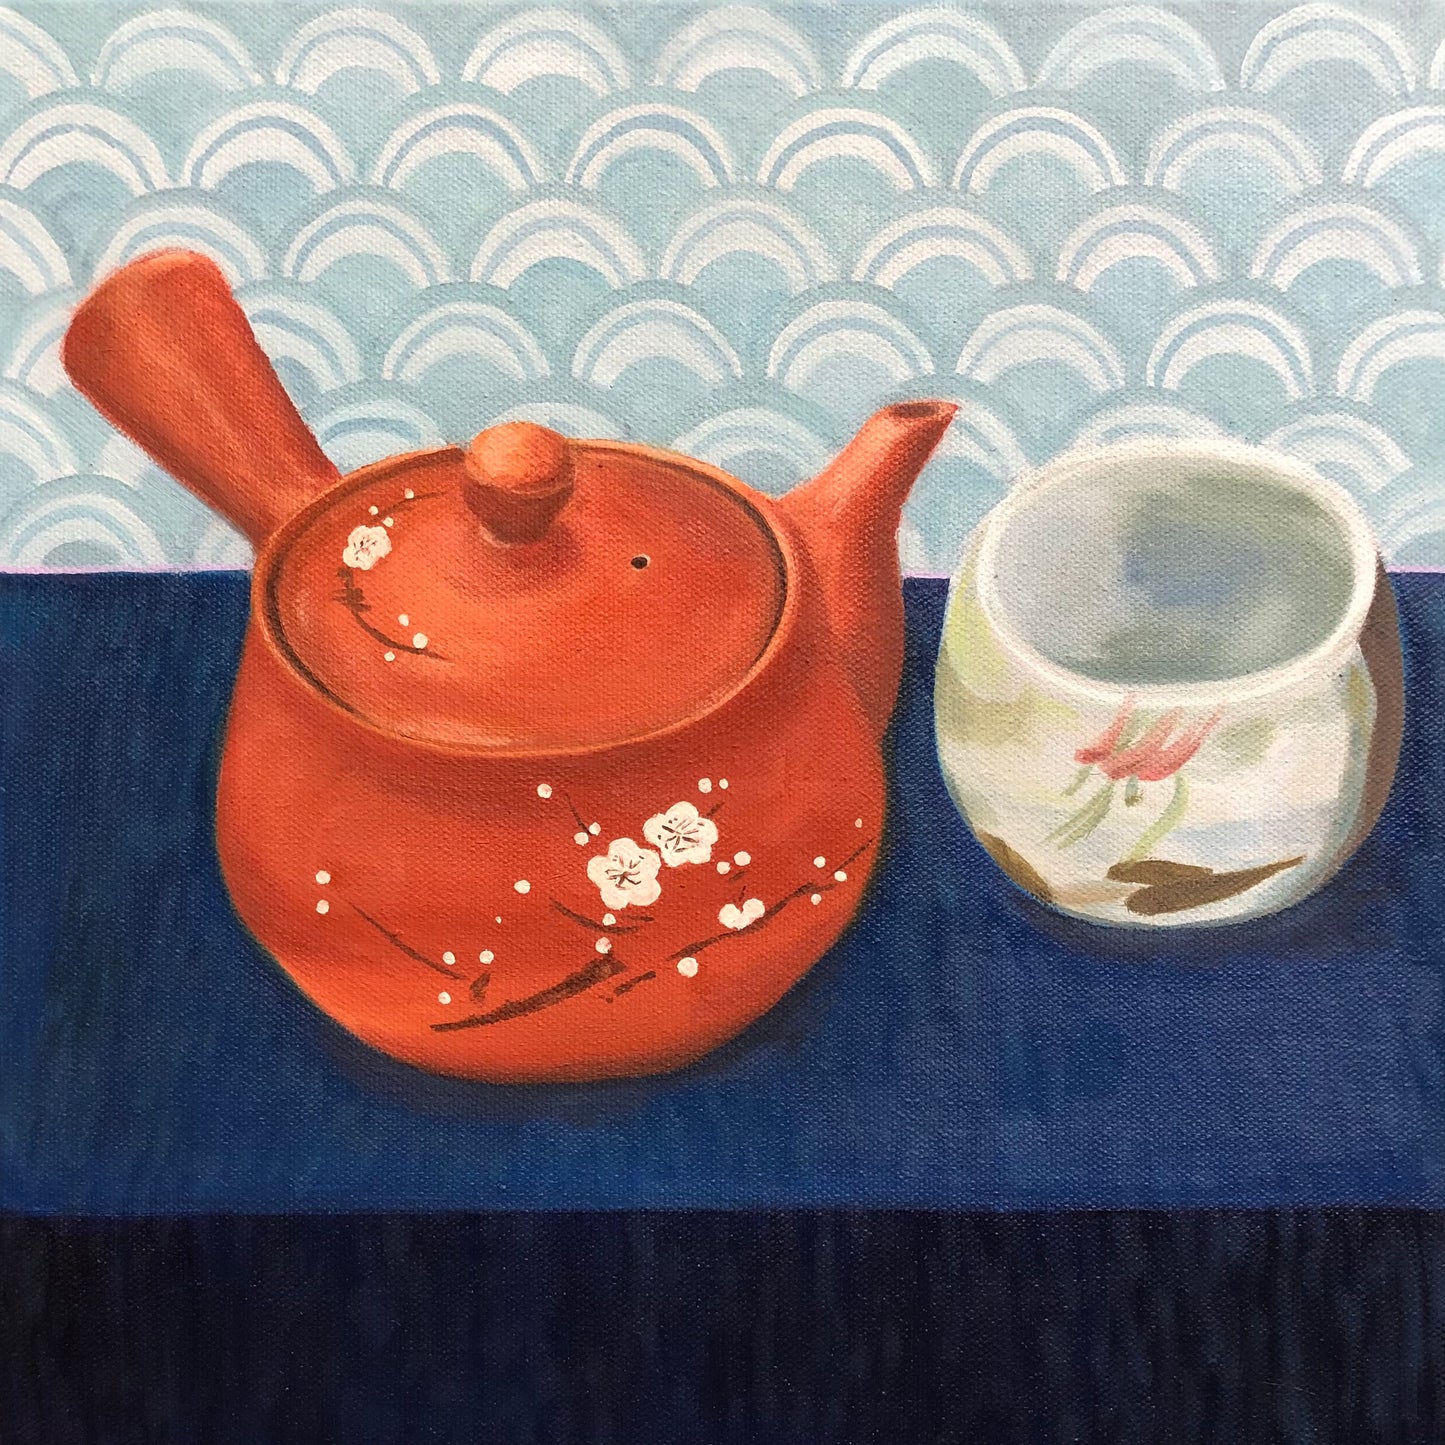 still life oil painting of terra cotta traditional Japanese teapot with painted sakura branch and blossoms next to hand-painted teacup, in front of blue and white patterned wall